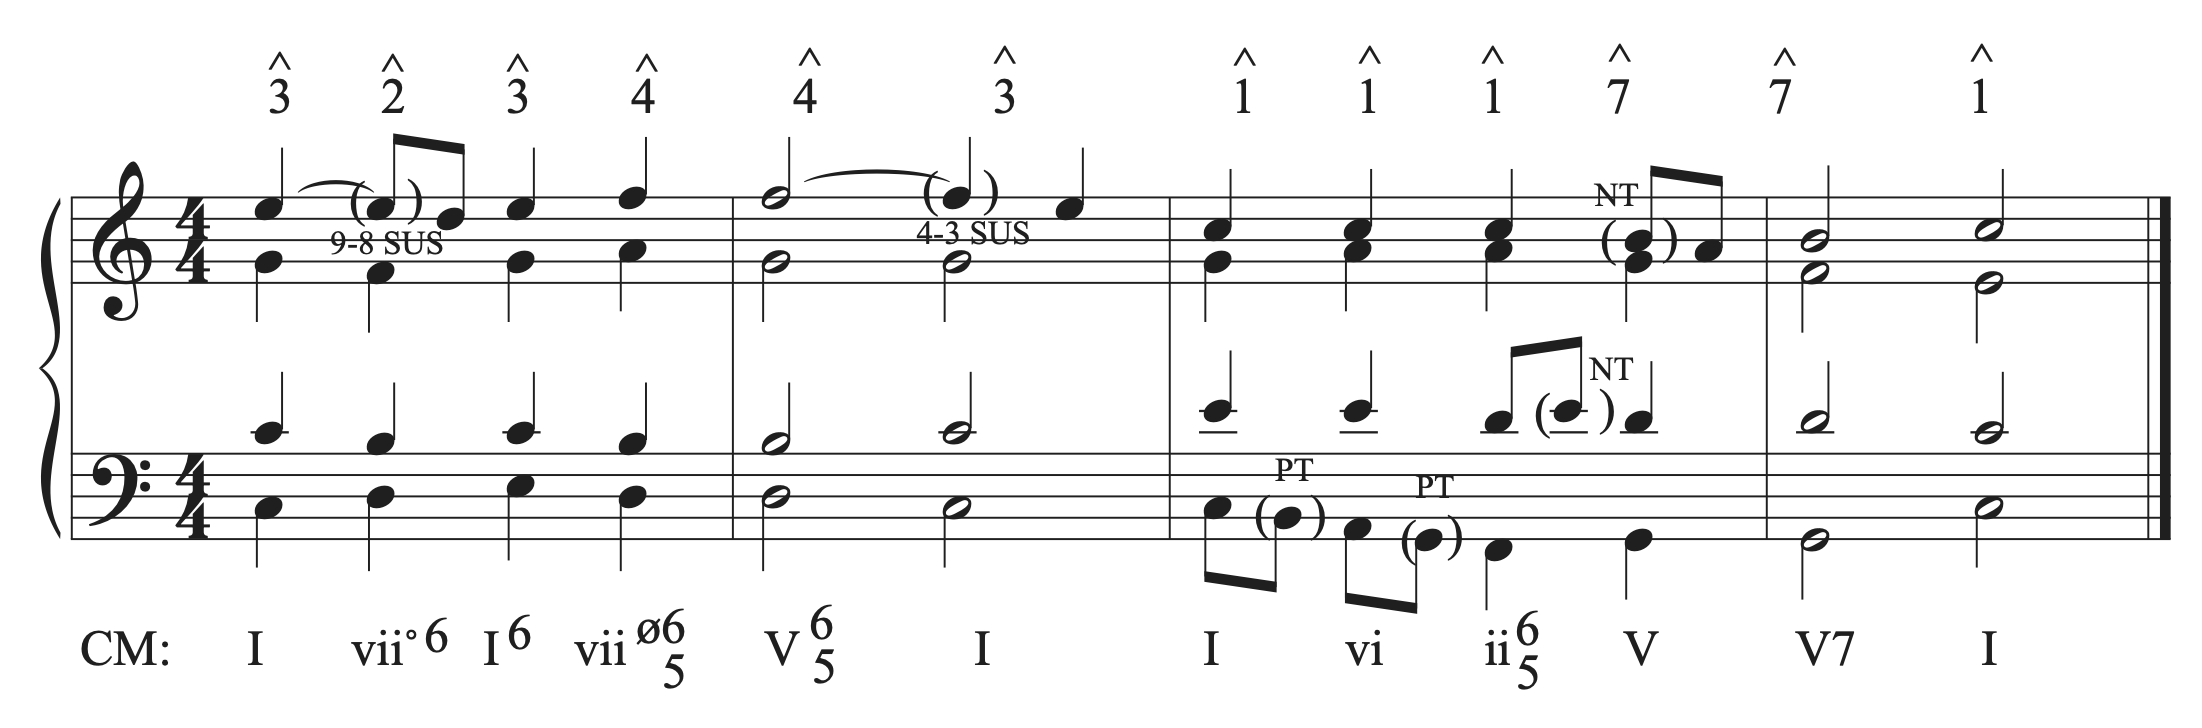 The musical example in C major with neighbor tones added.